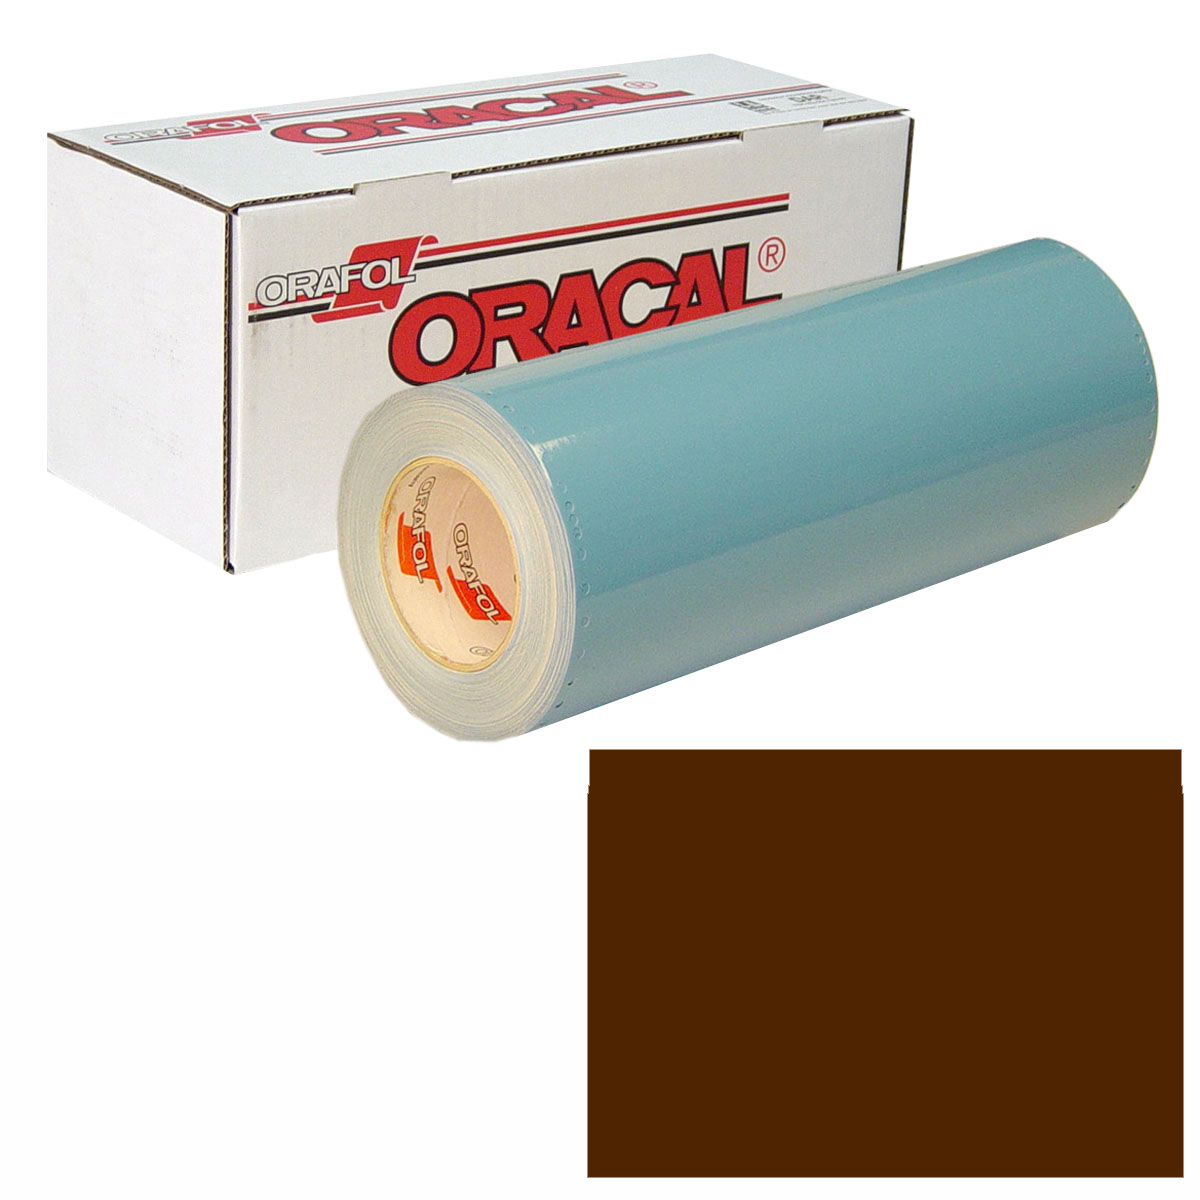 ORACAL 751 30in X 50yd 080 Brown